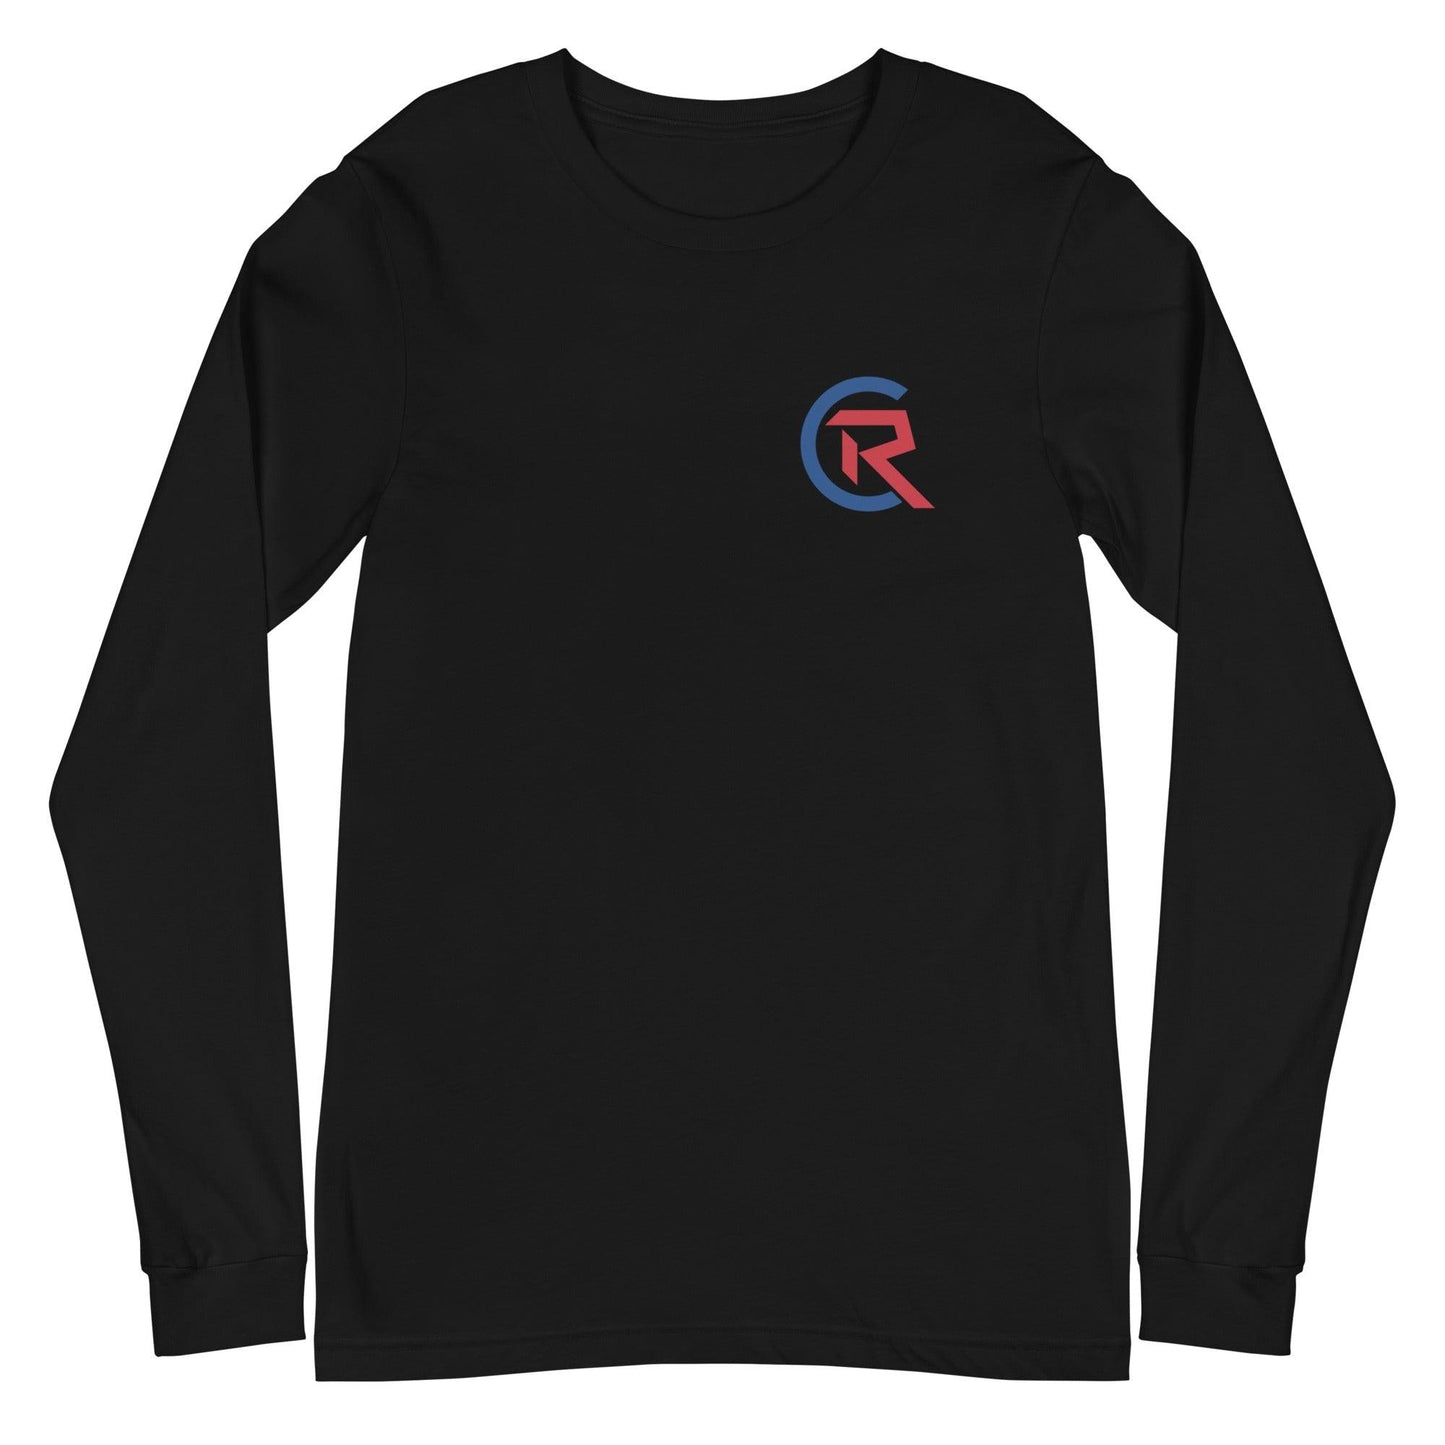 Cole Ragans “Signature” Long Sleeve Tee - Fan Arch